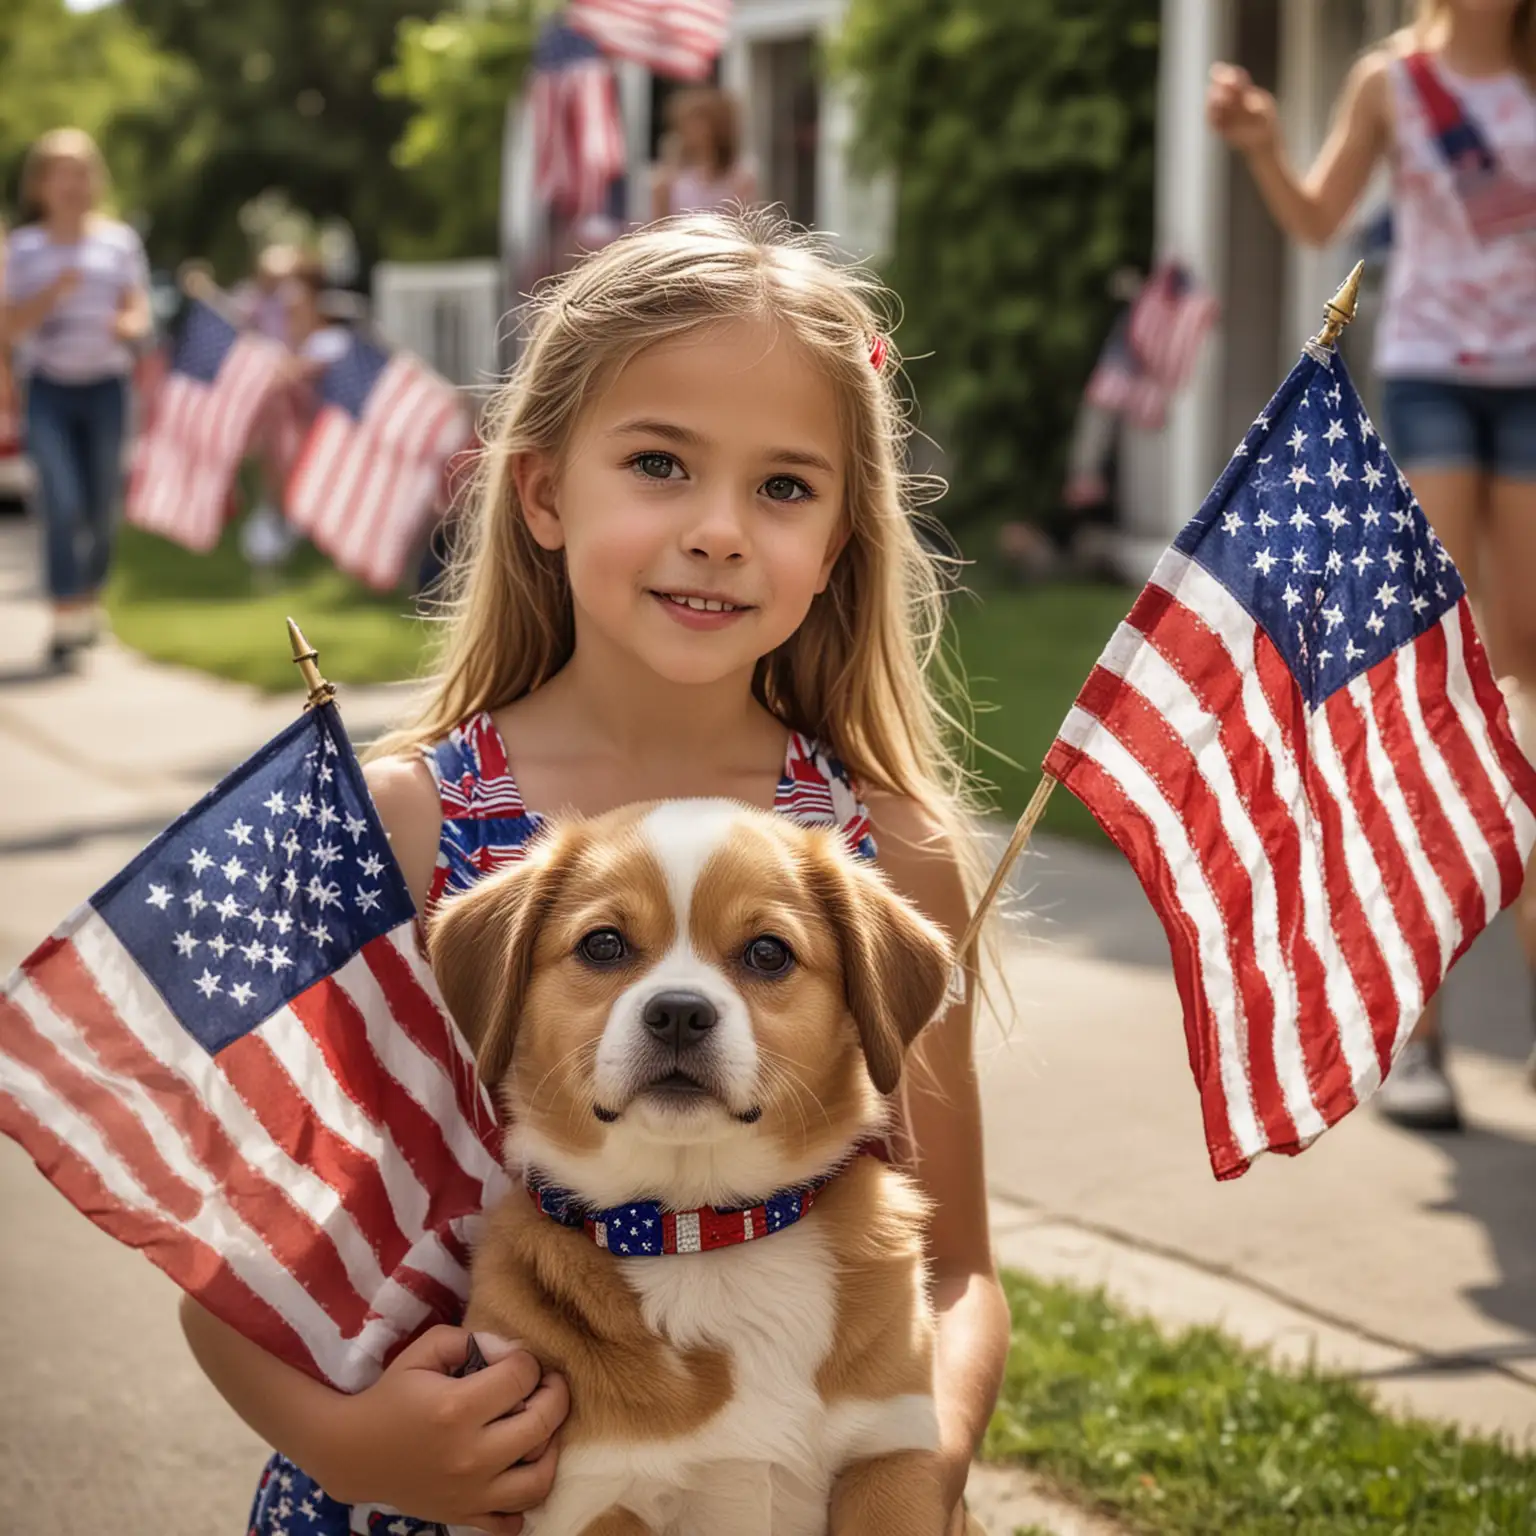 Young Girl with Dog Enjoying 4th of July Parade Amidst American Flag